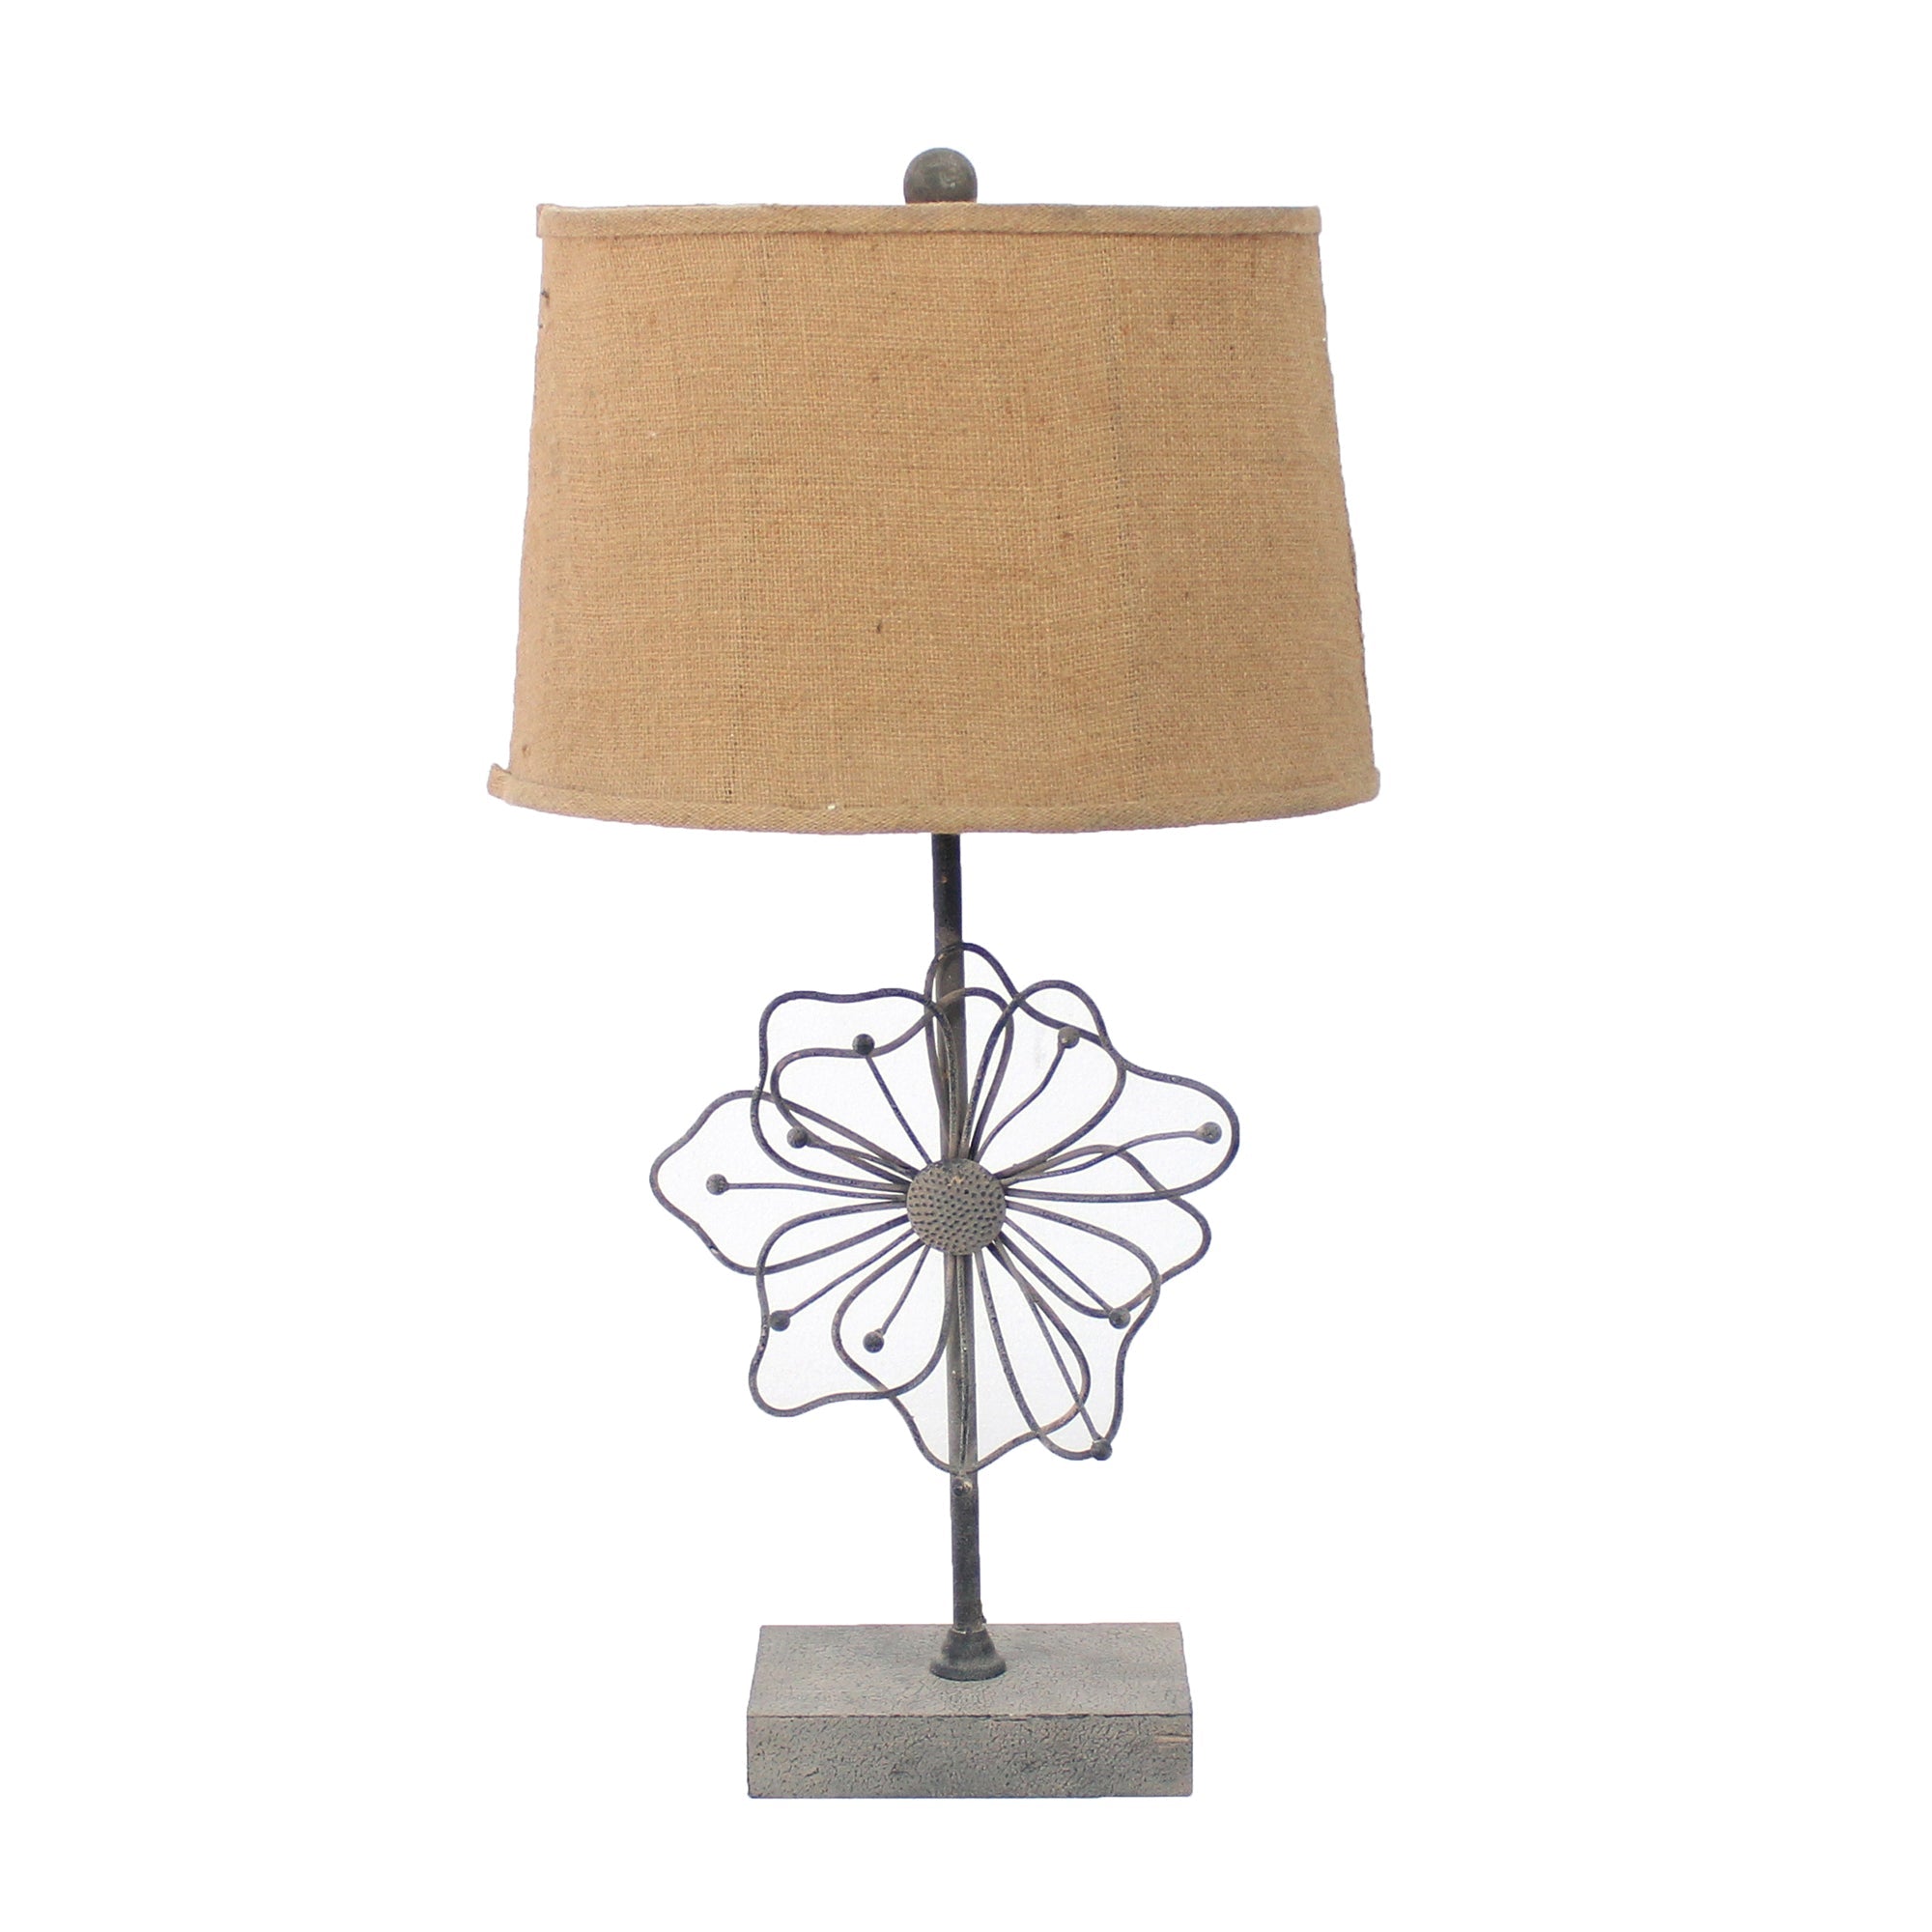 11 X 15 X 27.75 Tan Country Cottage With Blooming Flower Pedestal - Table Lamp - Tuesday Morning-Table Lamps